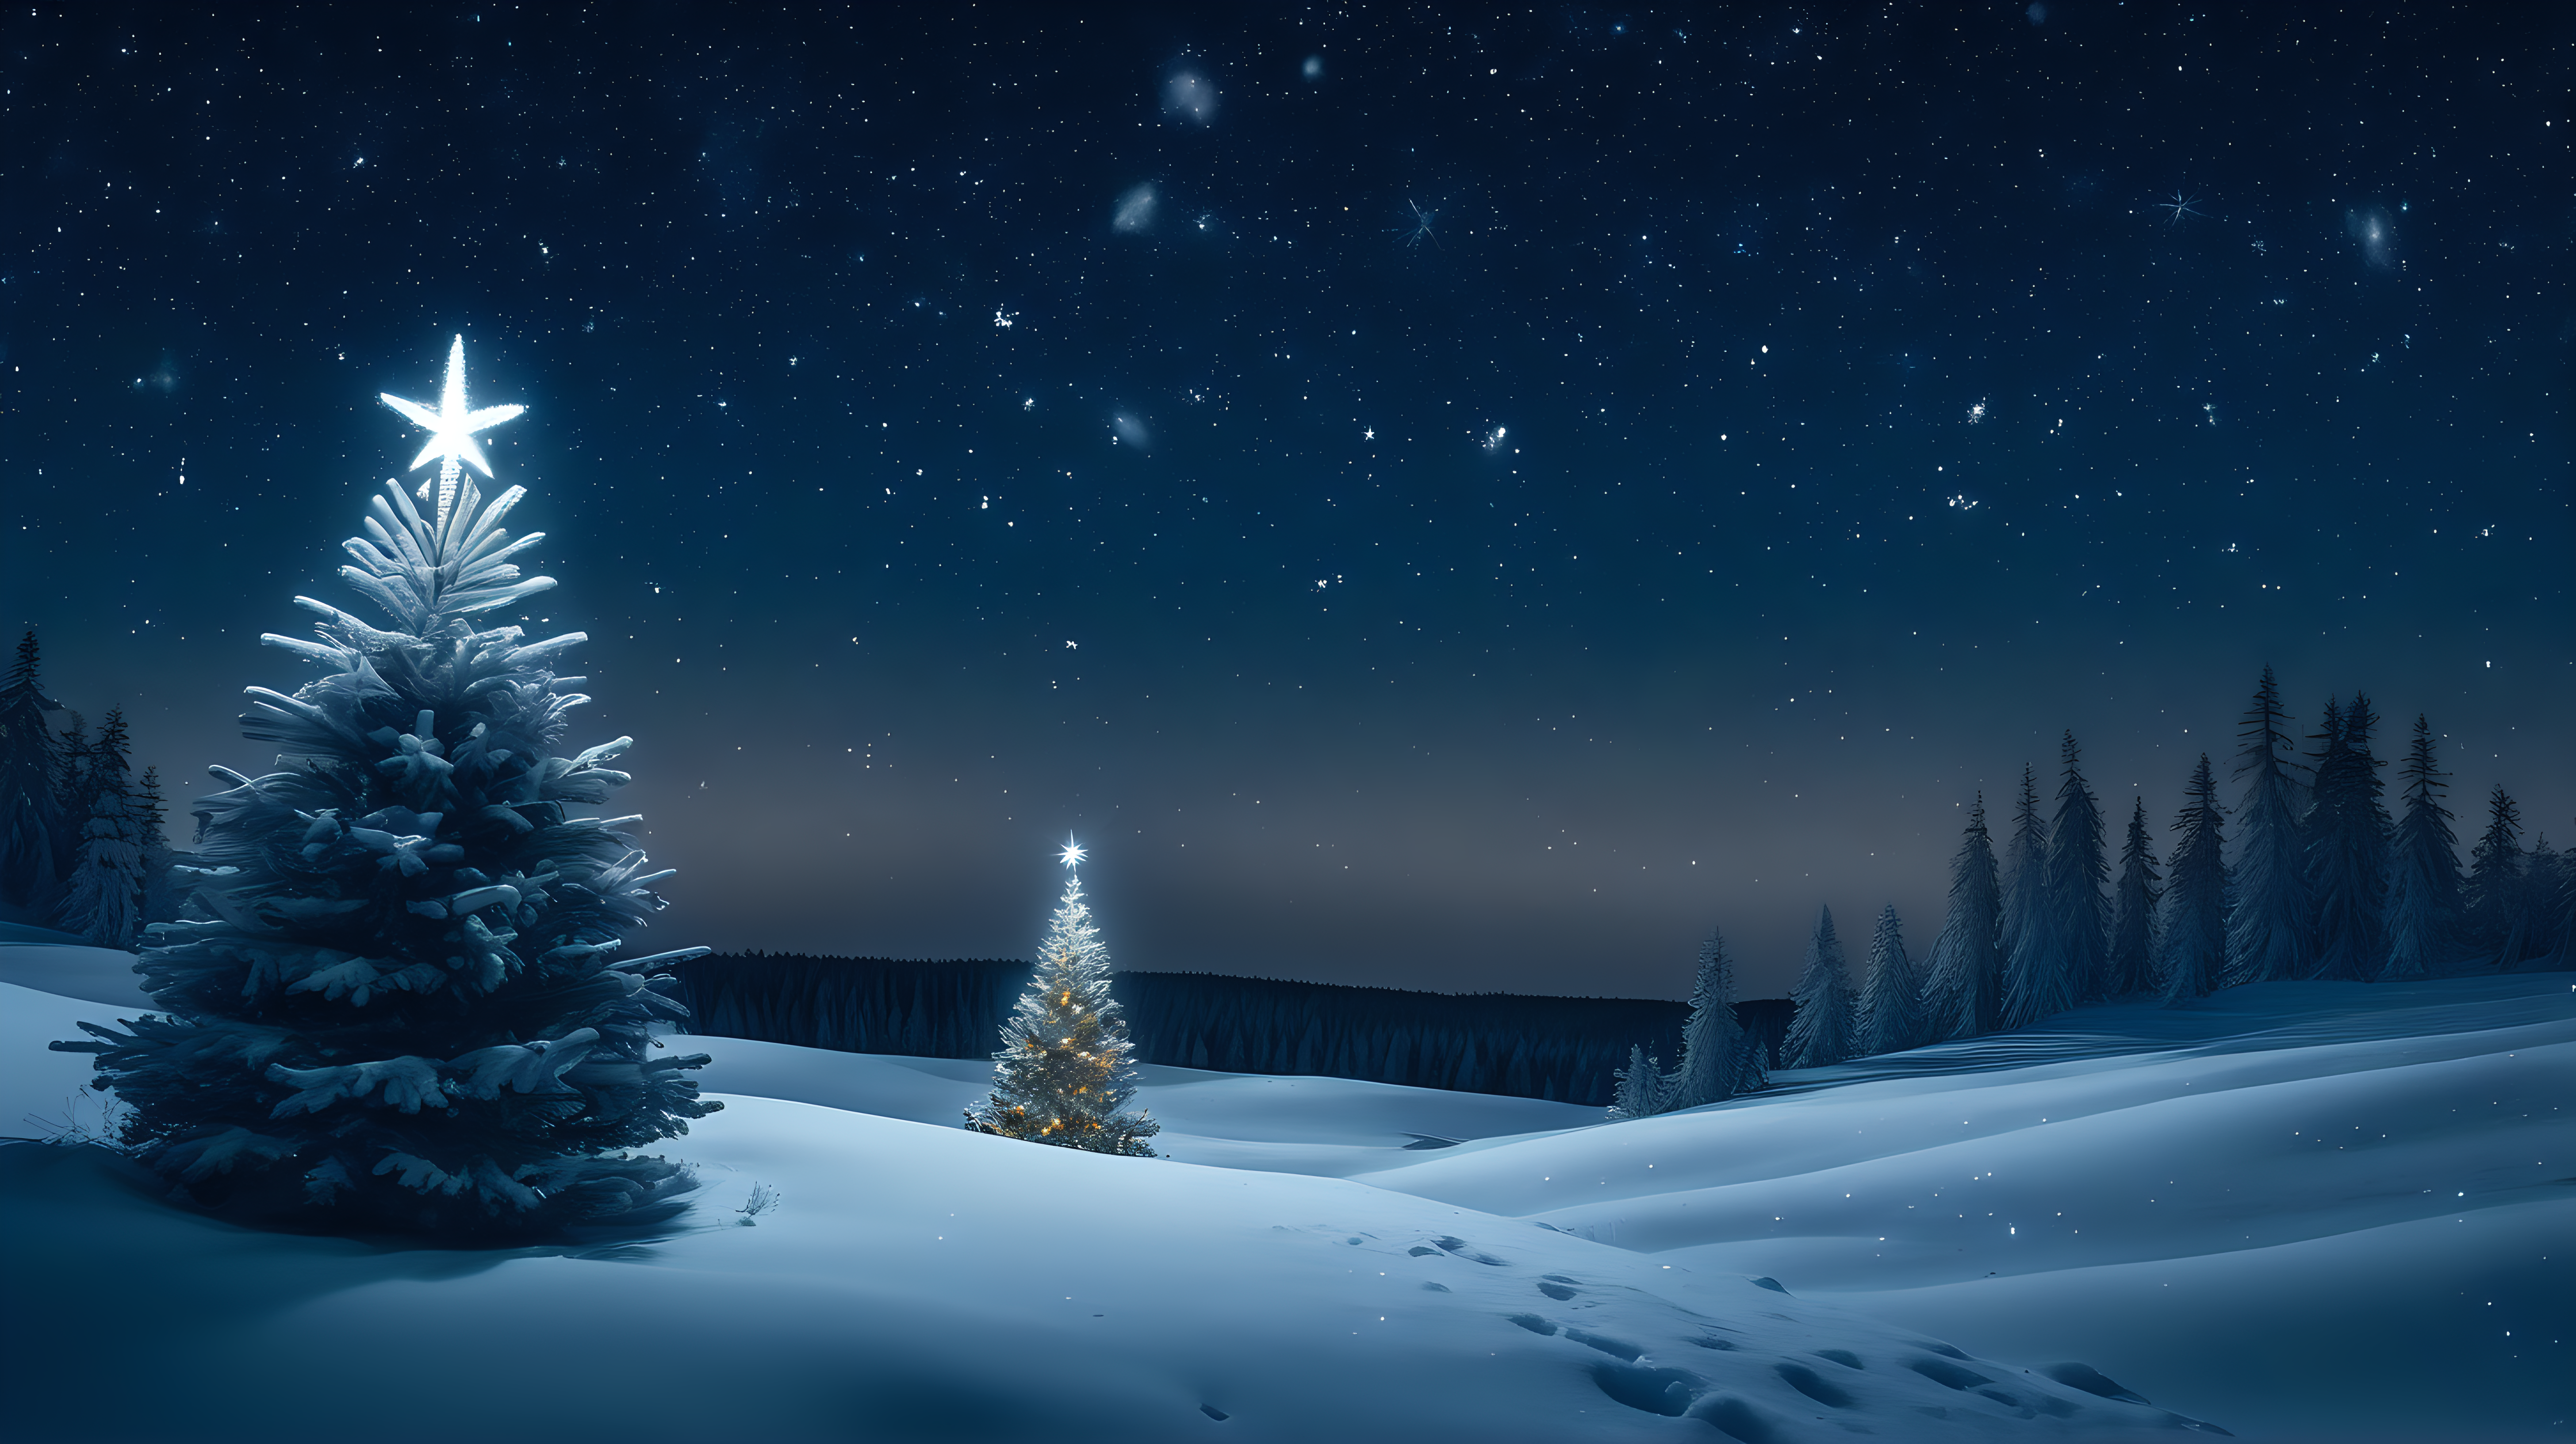 nighttime winter snowy plain and snowy forest behind. night sky with stars. Christmas tree in the foreground on the right